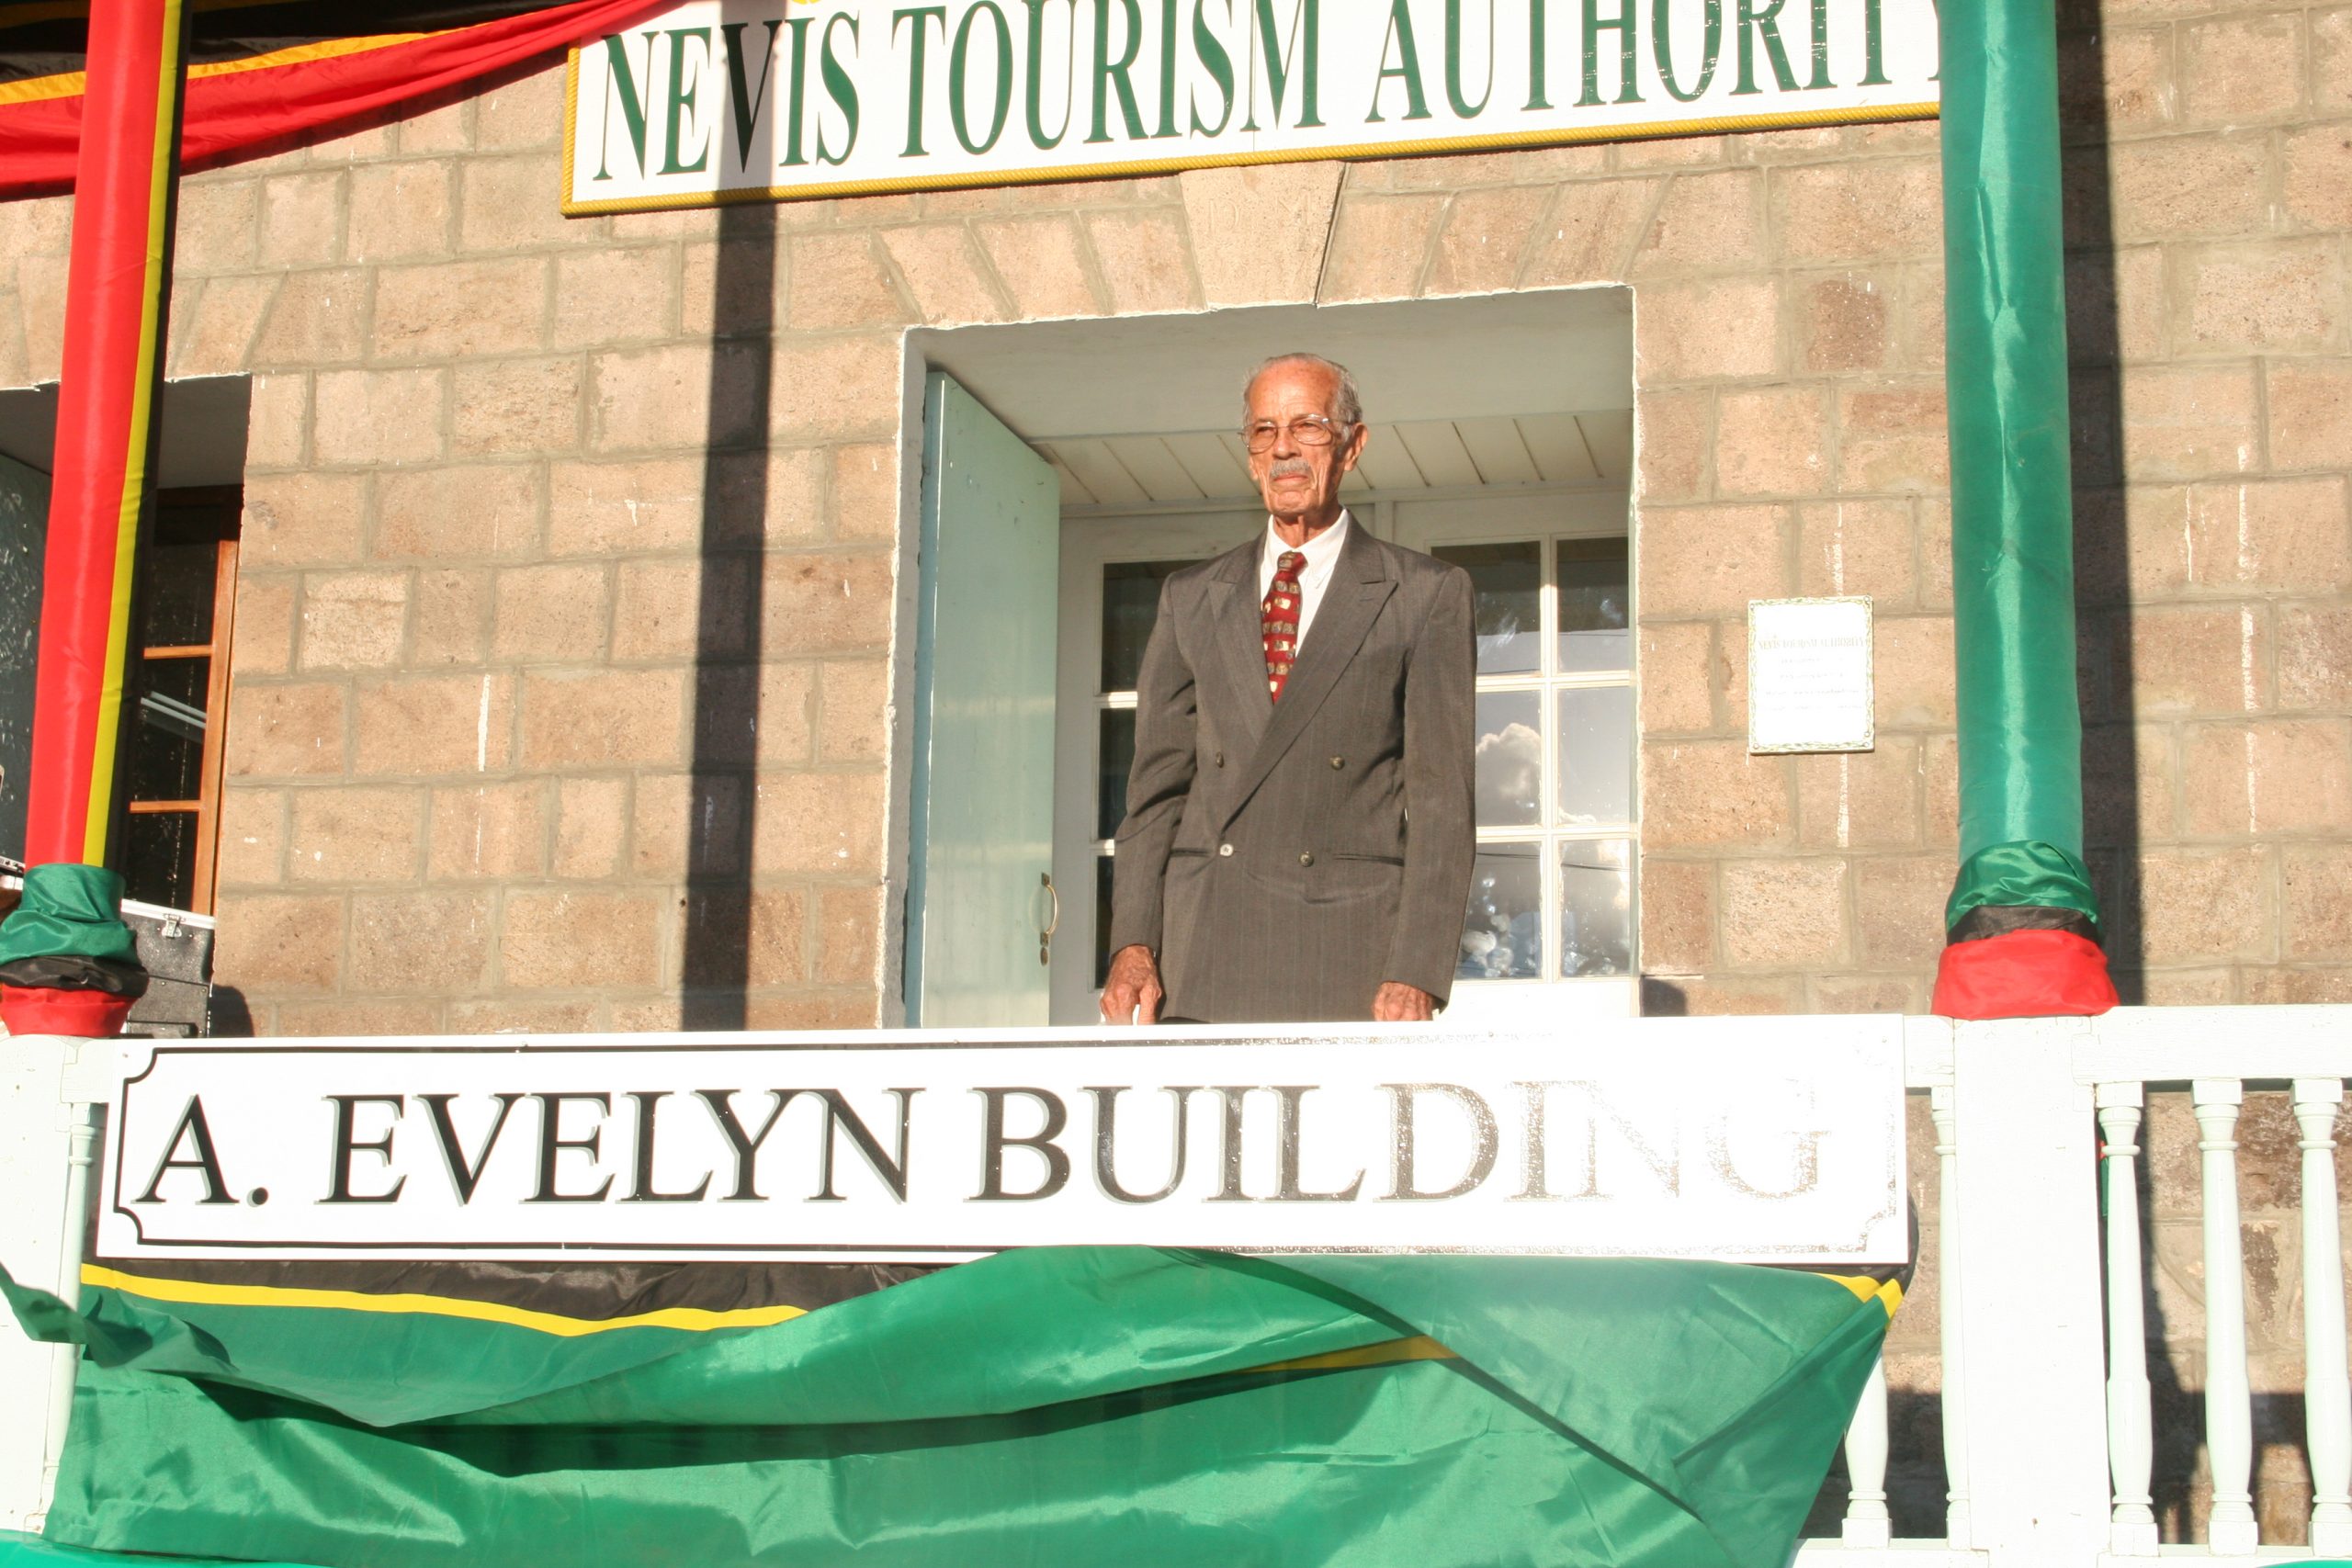 The late Mr. Arthur Evelyn, the First Minister of Tourism on Nevis, moments after unveiling the new name of the Old Treasury Building in Charlestown in 2010 renamed in his honour by the Nevis Island Administration